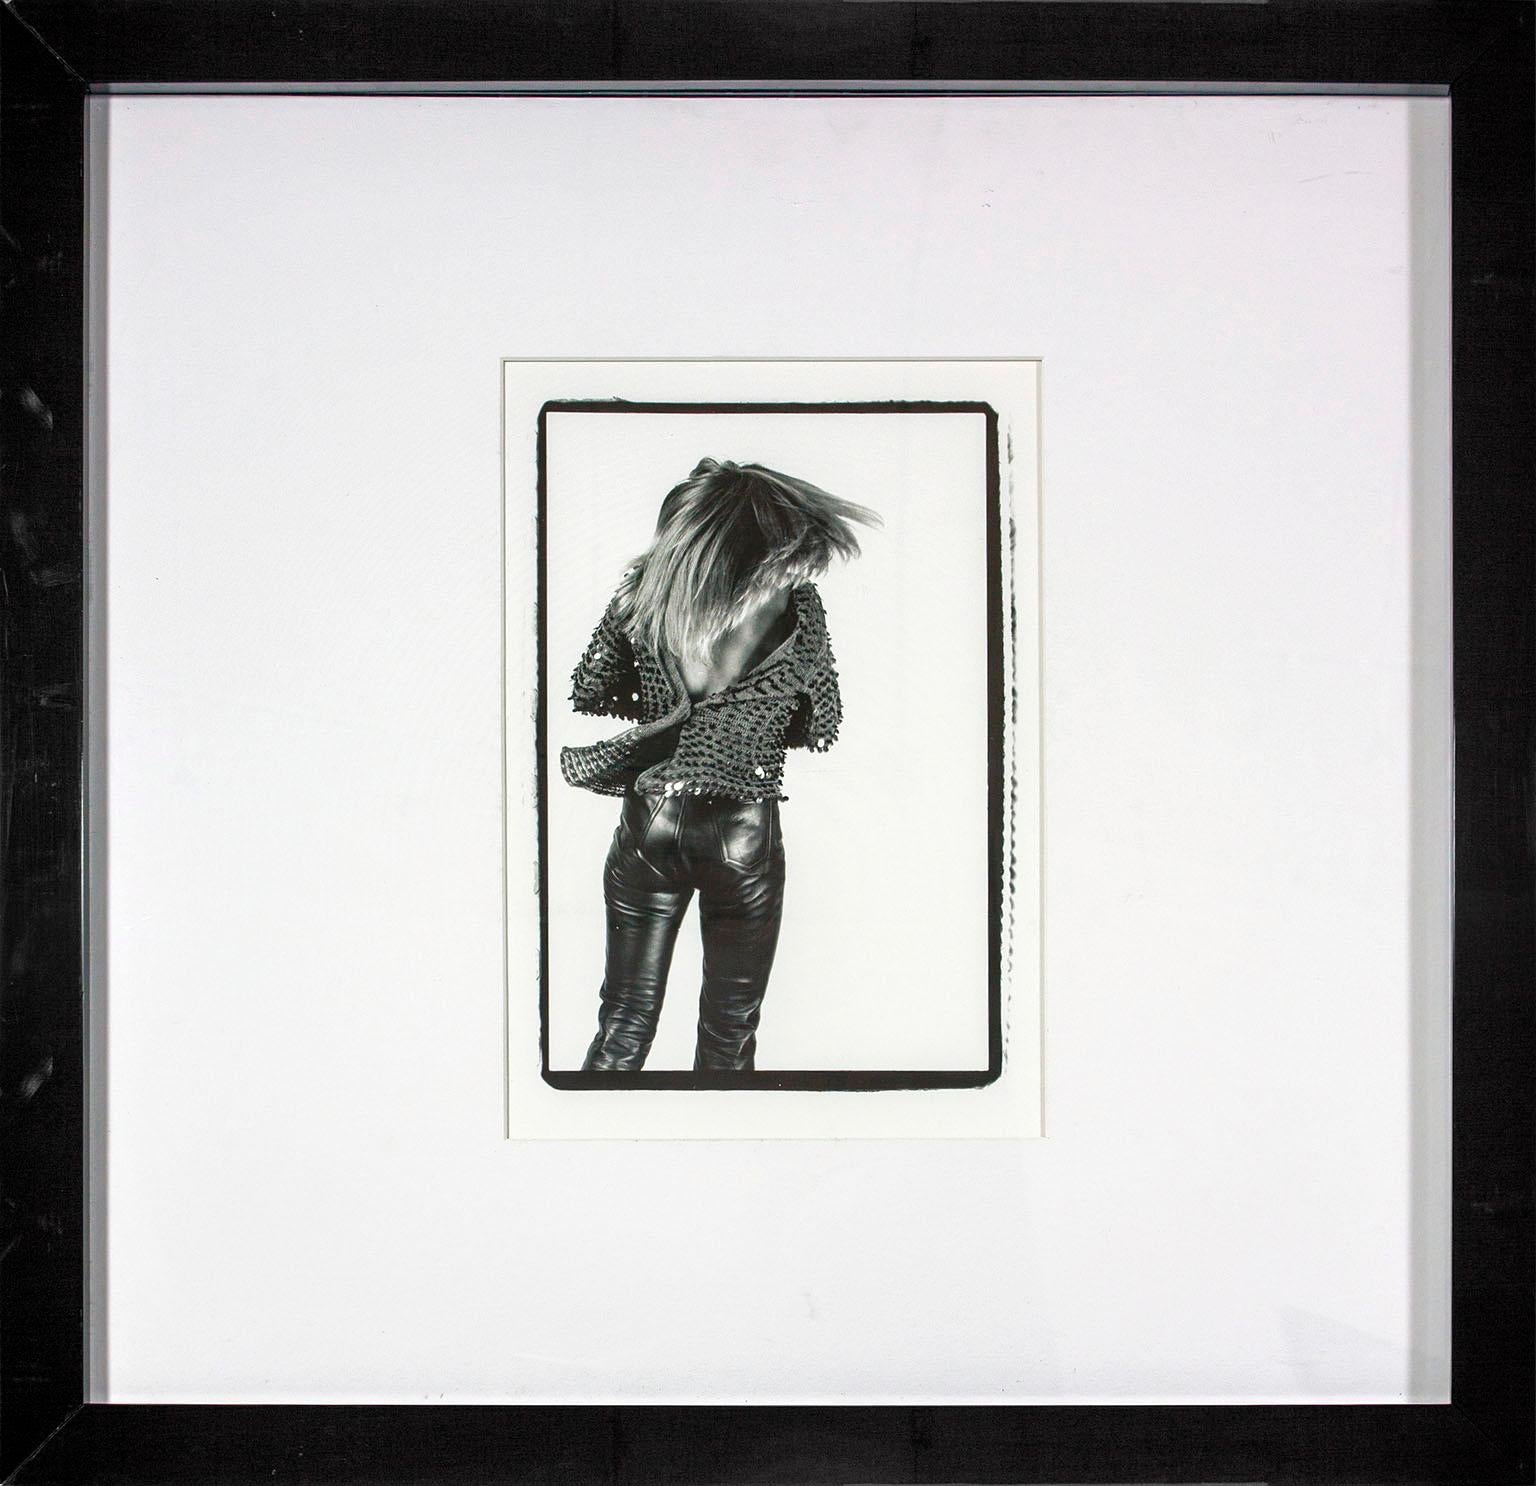 "Tina Turner 'The Back'" framed black and white photograph by Lynn Goldsmith. Image size: 15 1/2 x 10 1/2 inches. This photograph was previously displayed in a guest room of the original Hard Rock Hotel and Casino in Las Vegas, Nevada, and comes